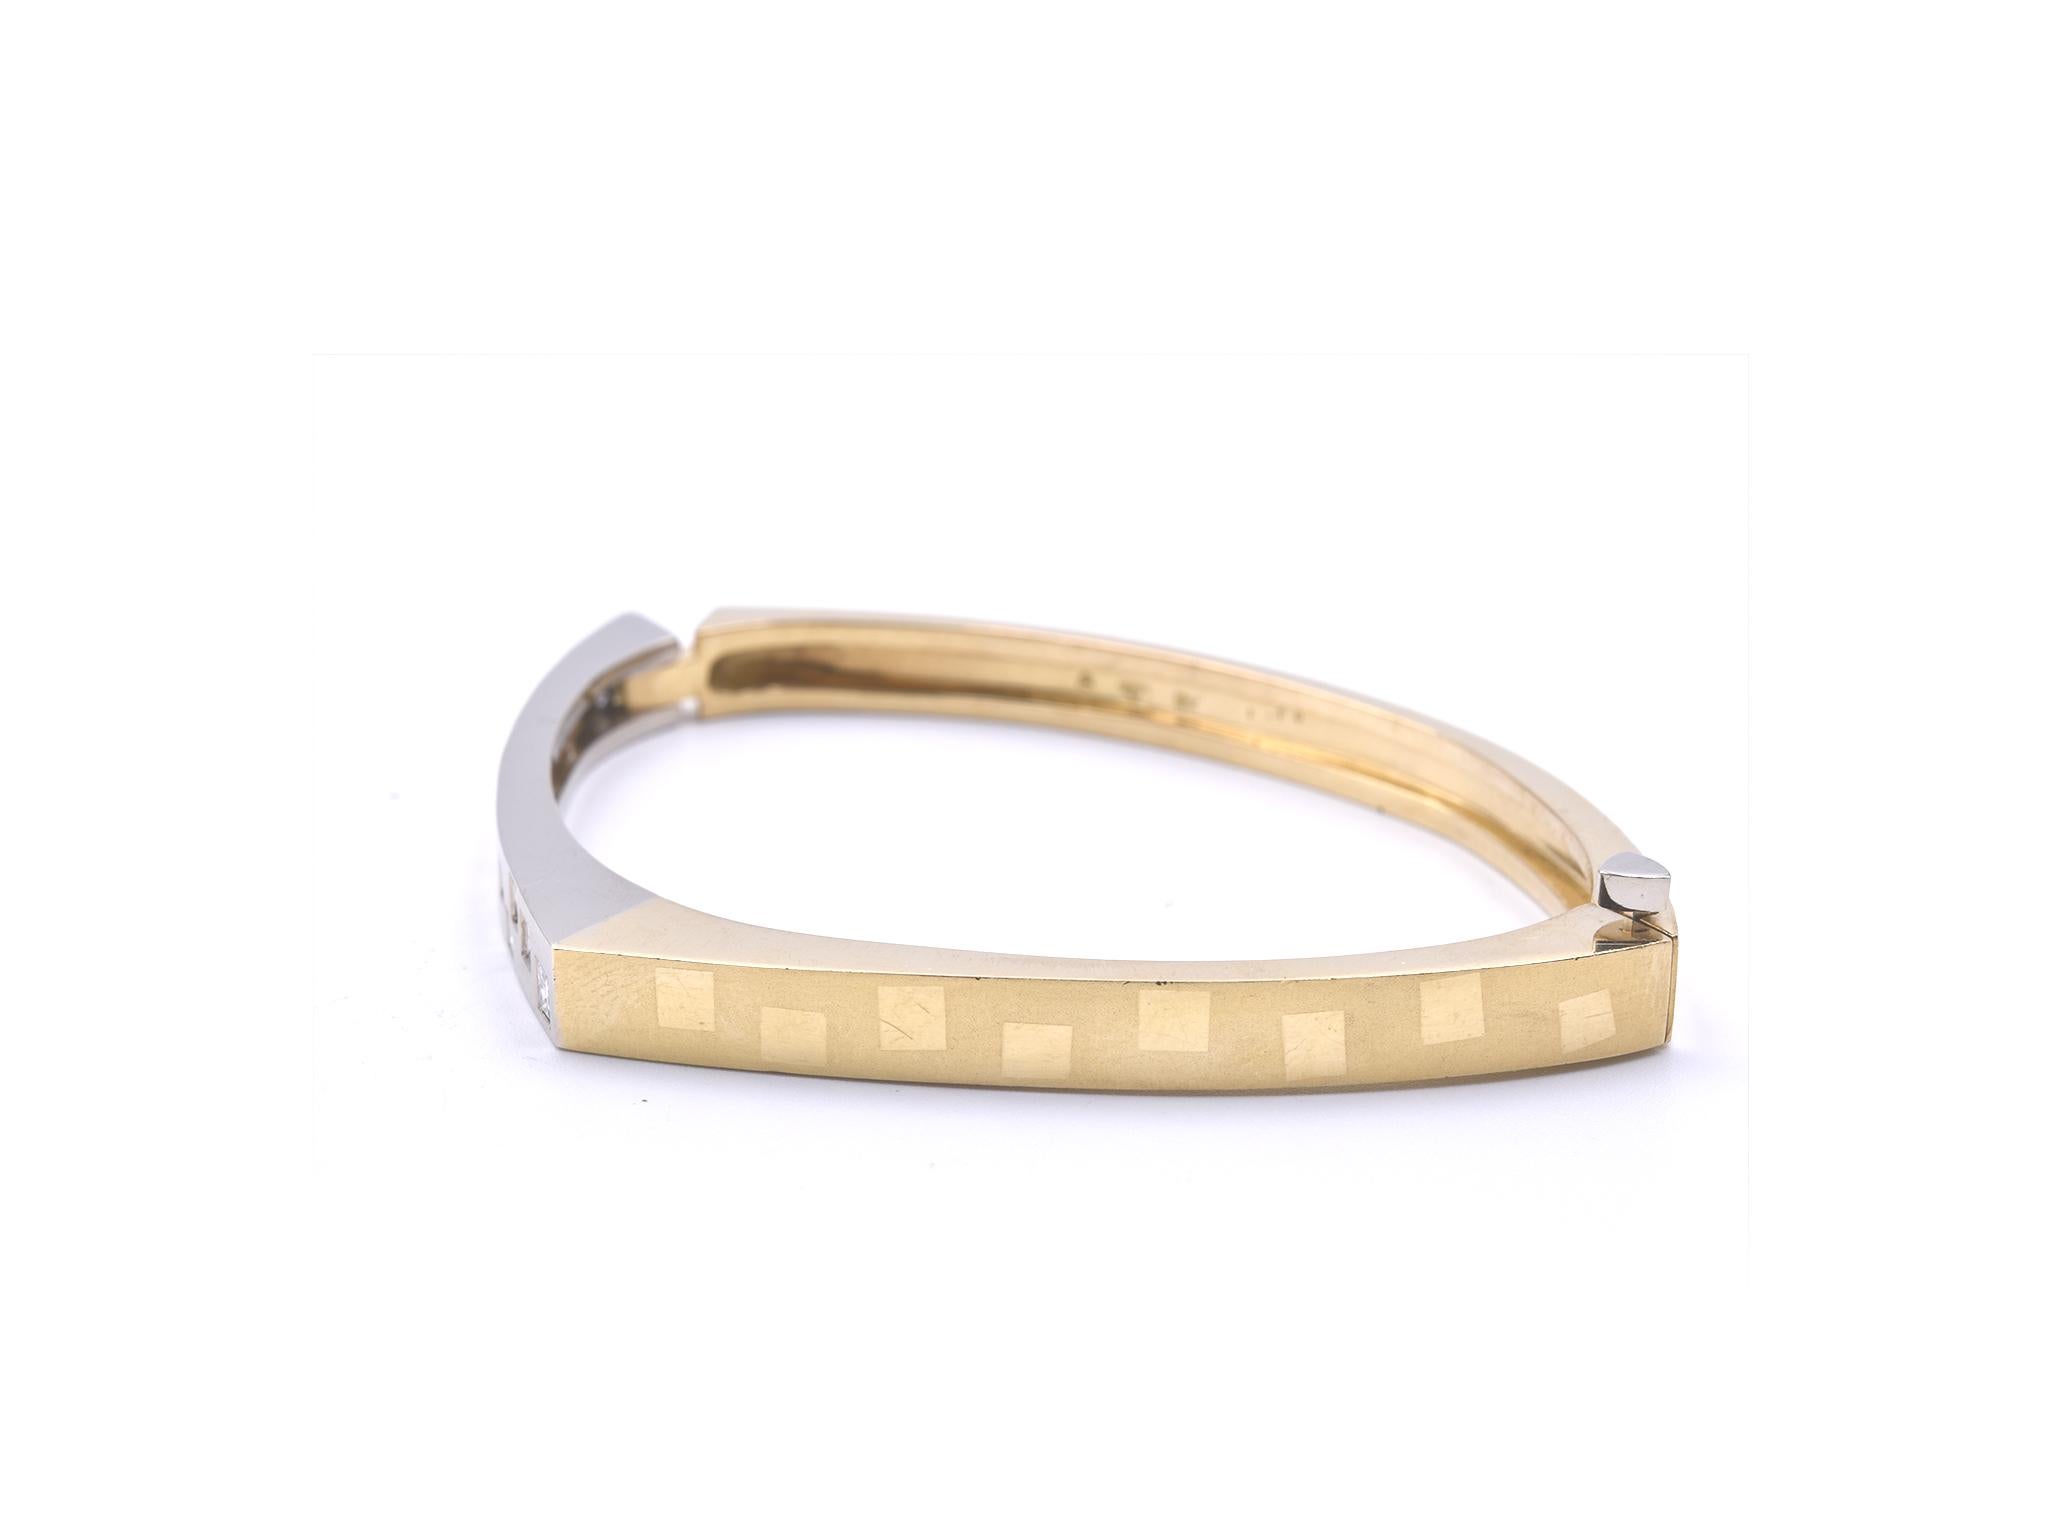 Designer: Cornelius Hollander
Material: 18k yellow gold 
Diamond: 13 princess cut = 1.25cttw
Color: G
Clarity: VS2
Dimensions: bracelet will fit a 7-inch wrist and it is 5.92mm wide
Weight: 43.80 grams